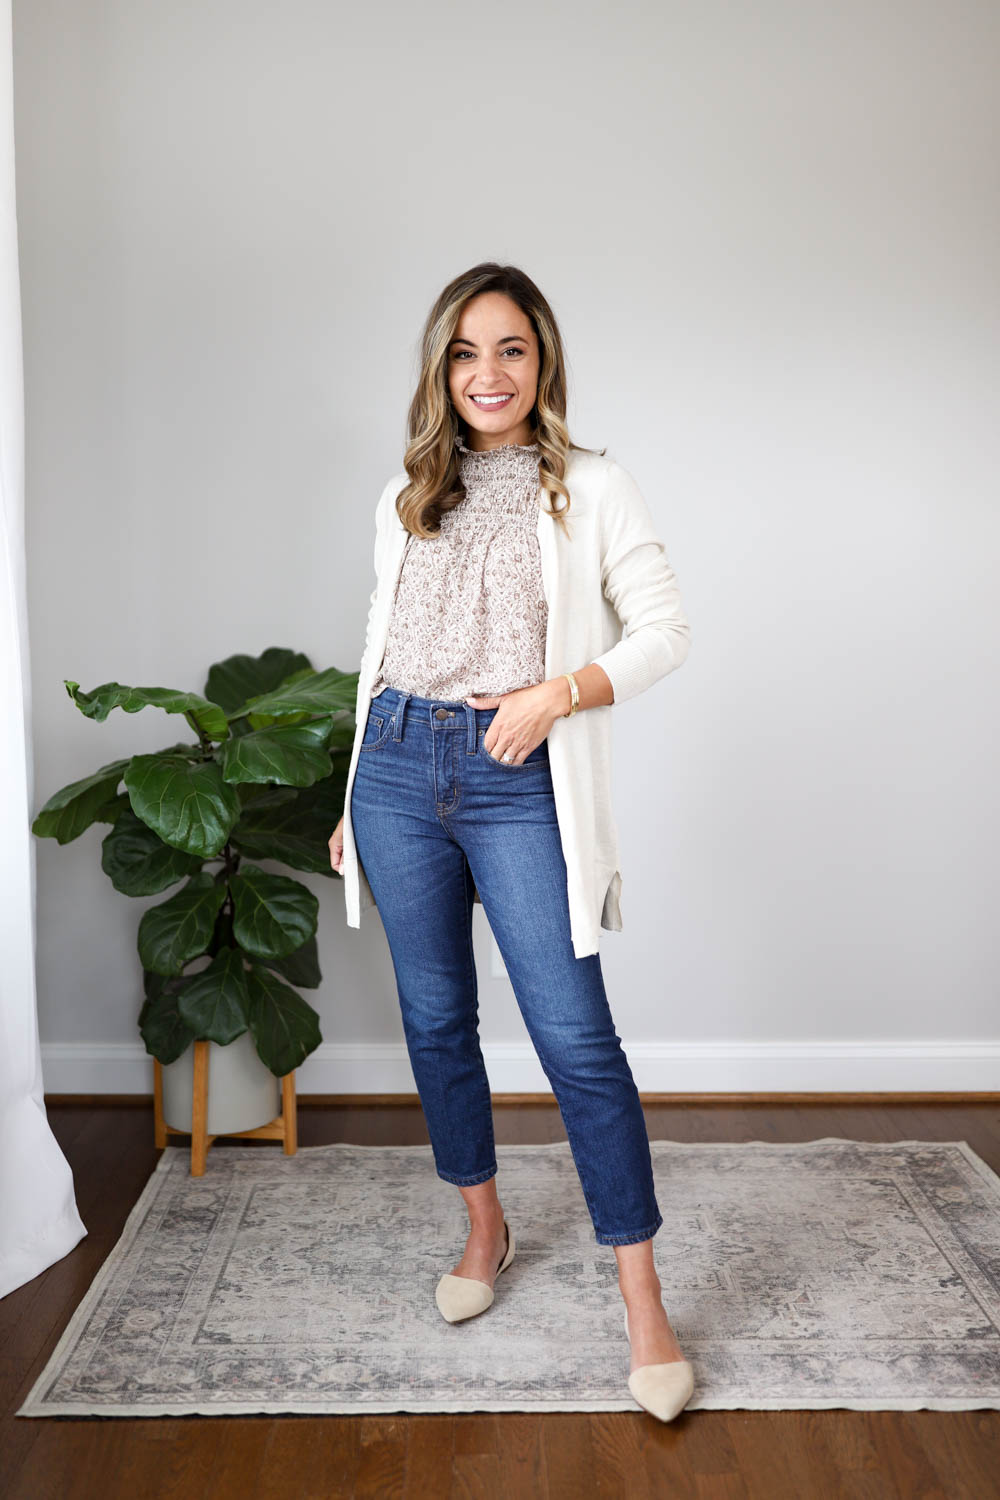 Arriba 51+ imagen jeans outfit for office